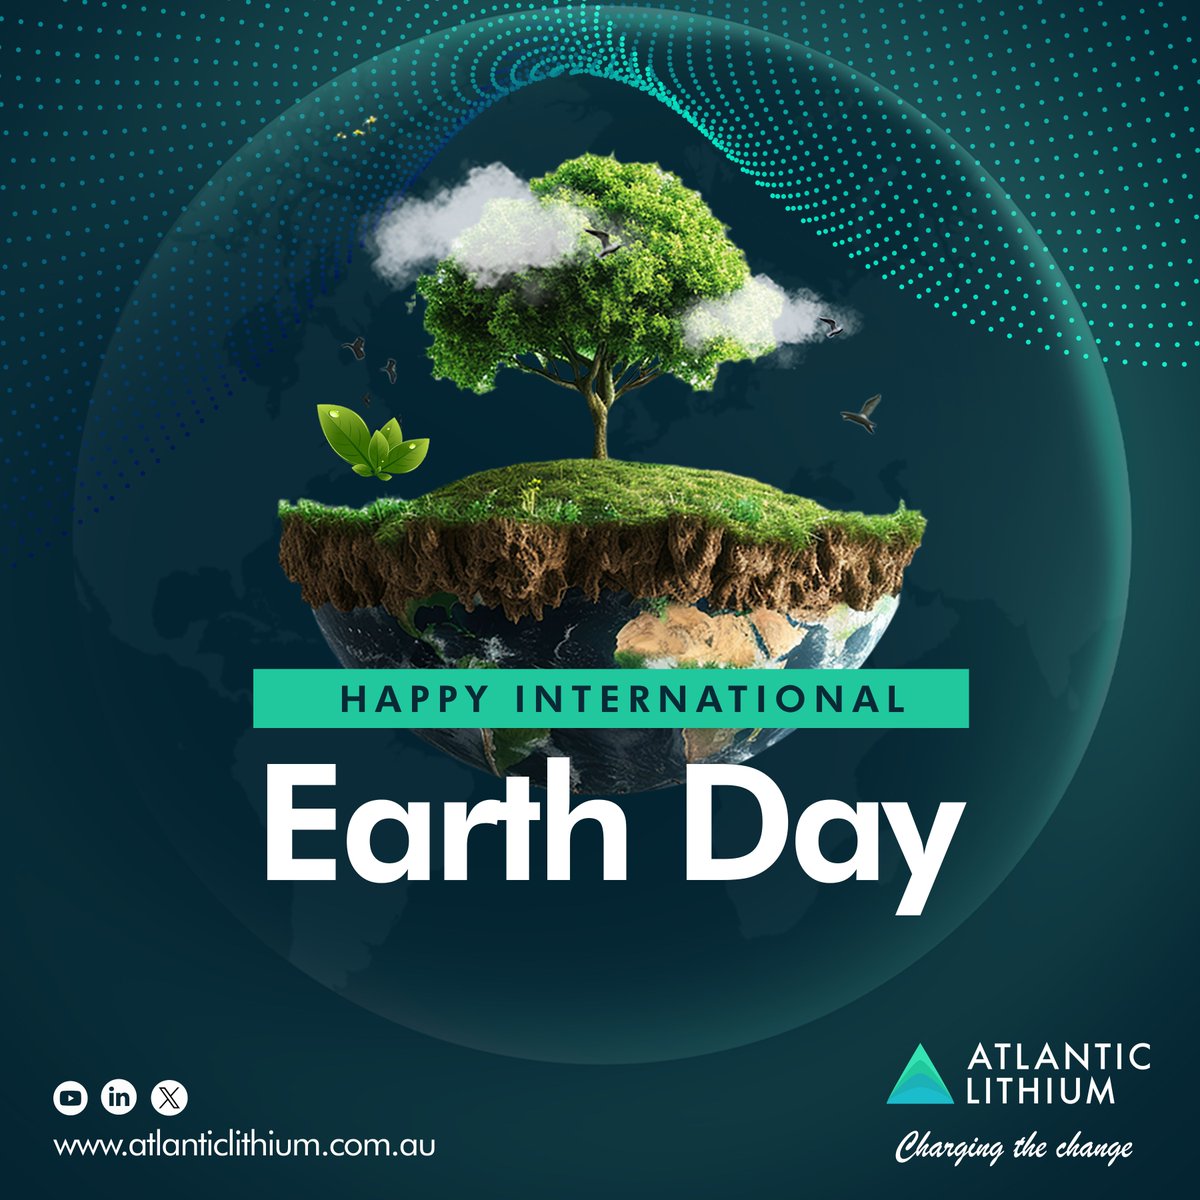 At Atlantic Lithium, our mission is enable the renewable energy transition through the responsible production of lithium products.

Recognising the part we can play in delivering a greener future, we are committed to being a responsible global citizen, acting at all times in